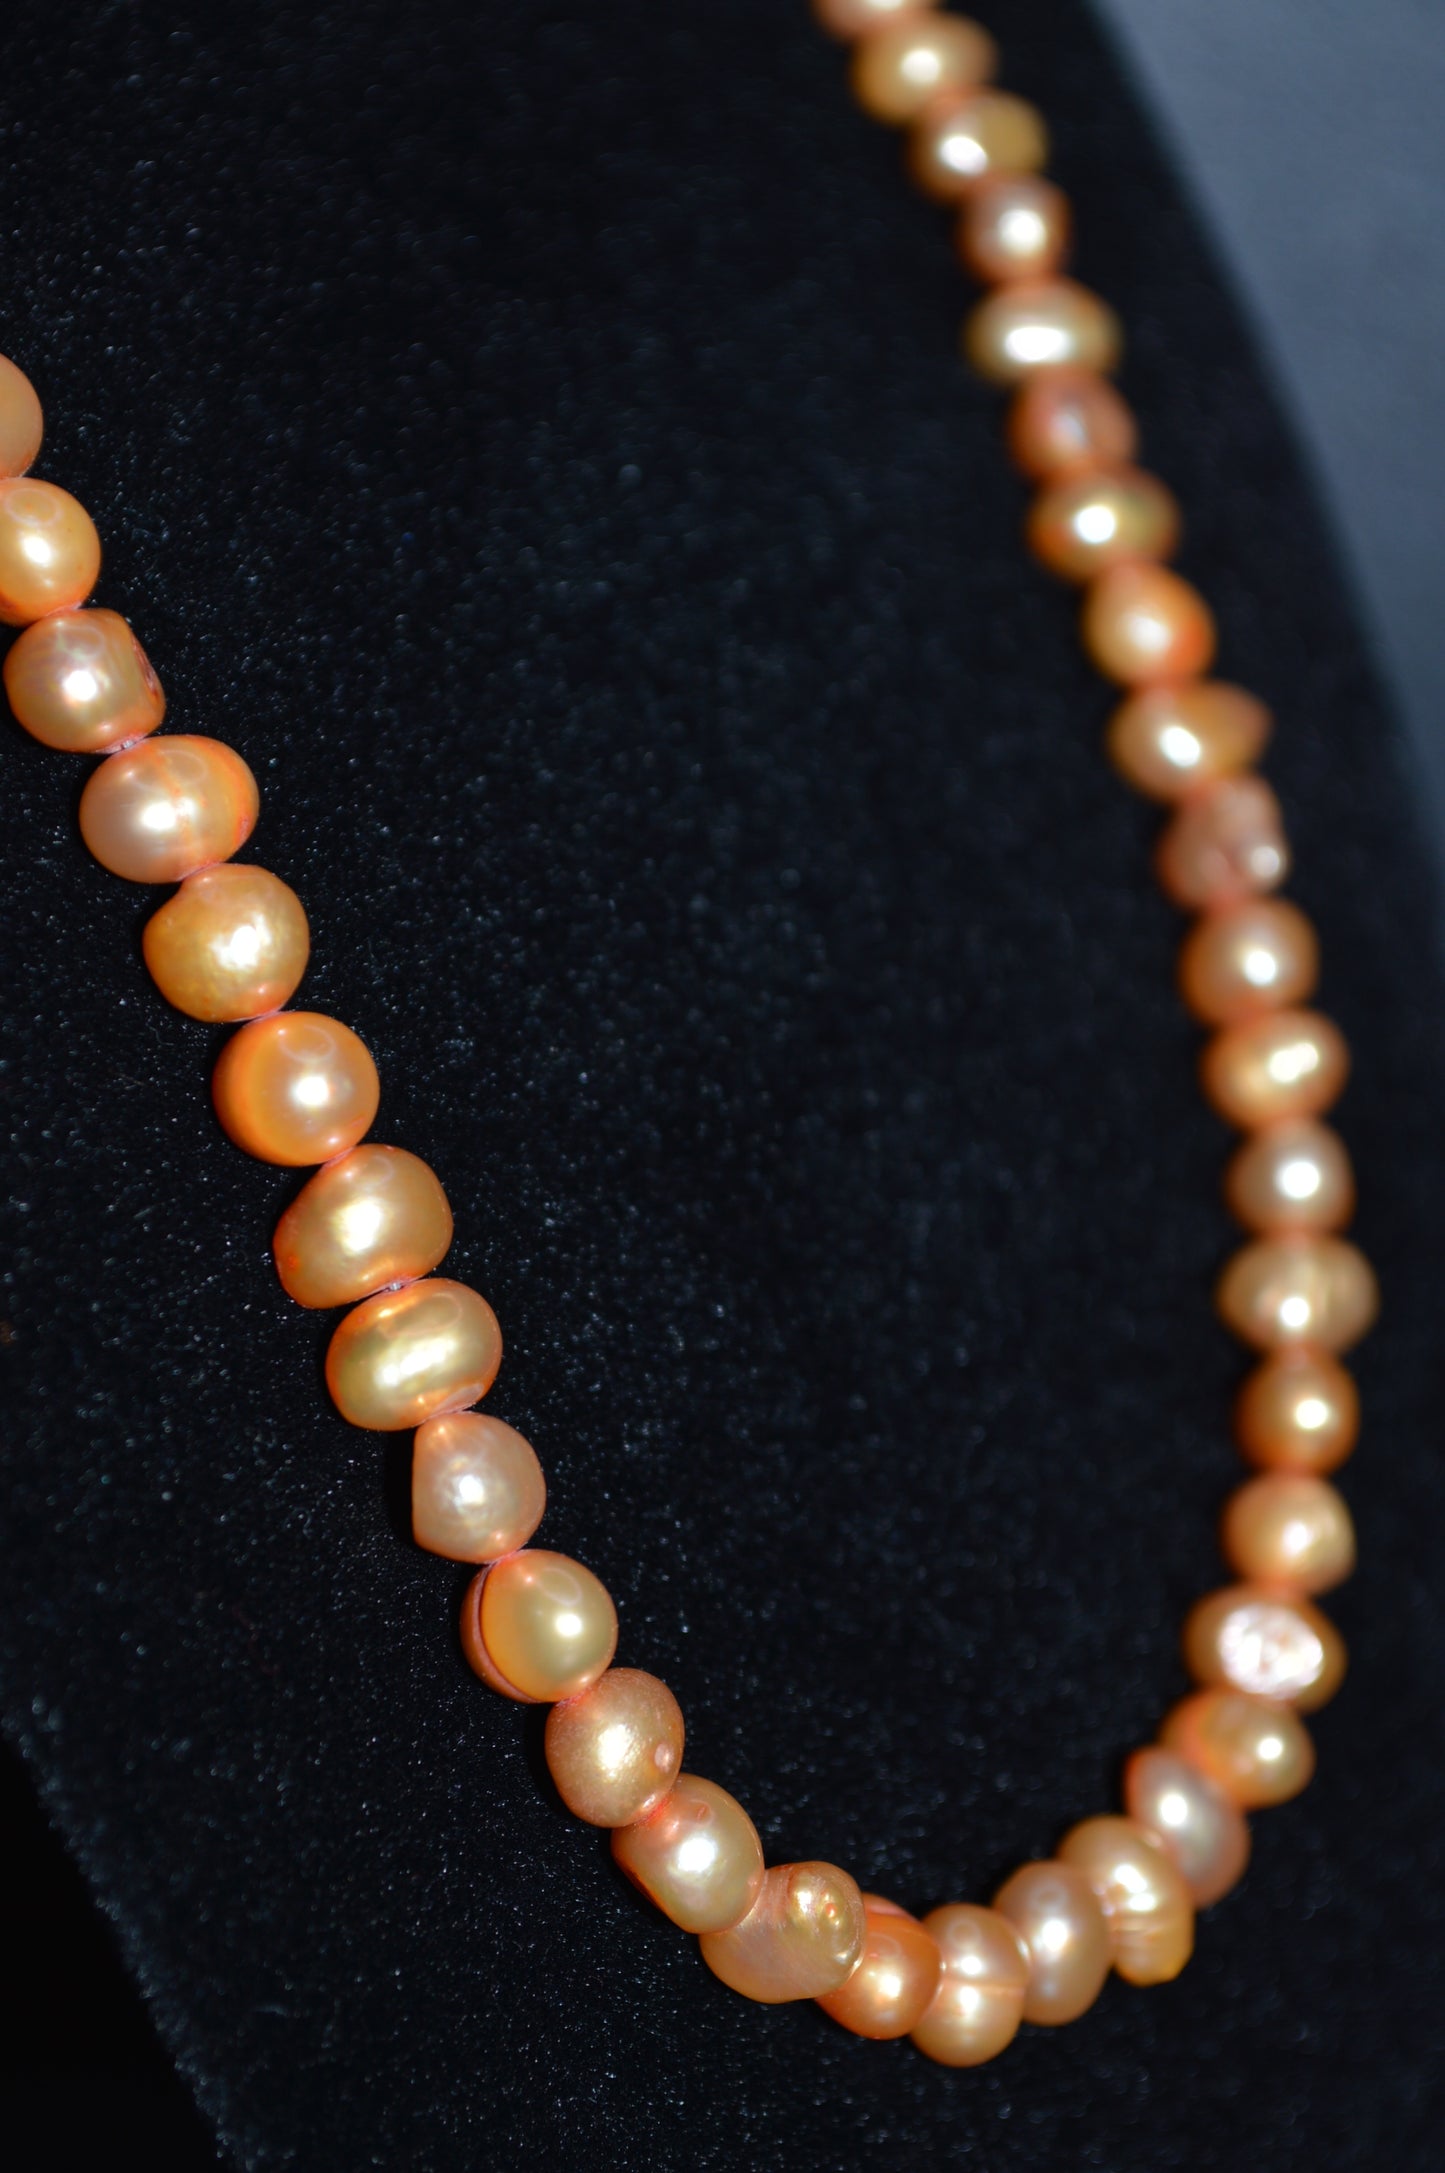 Freshwater Cultured Pearl Necklace and Earring Set (Apricot)